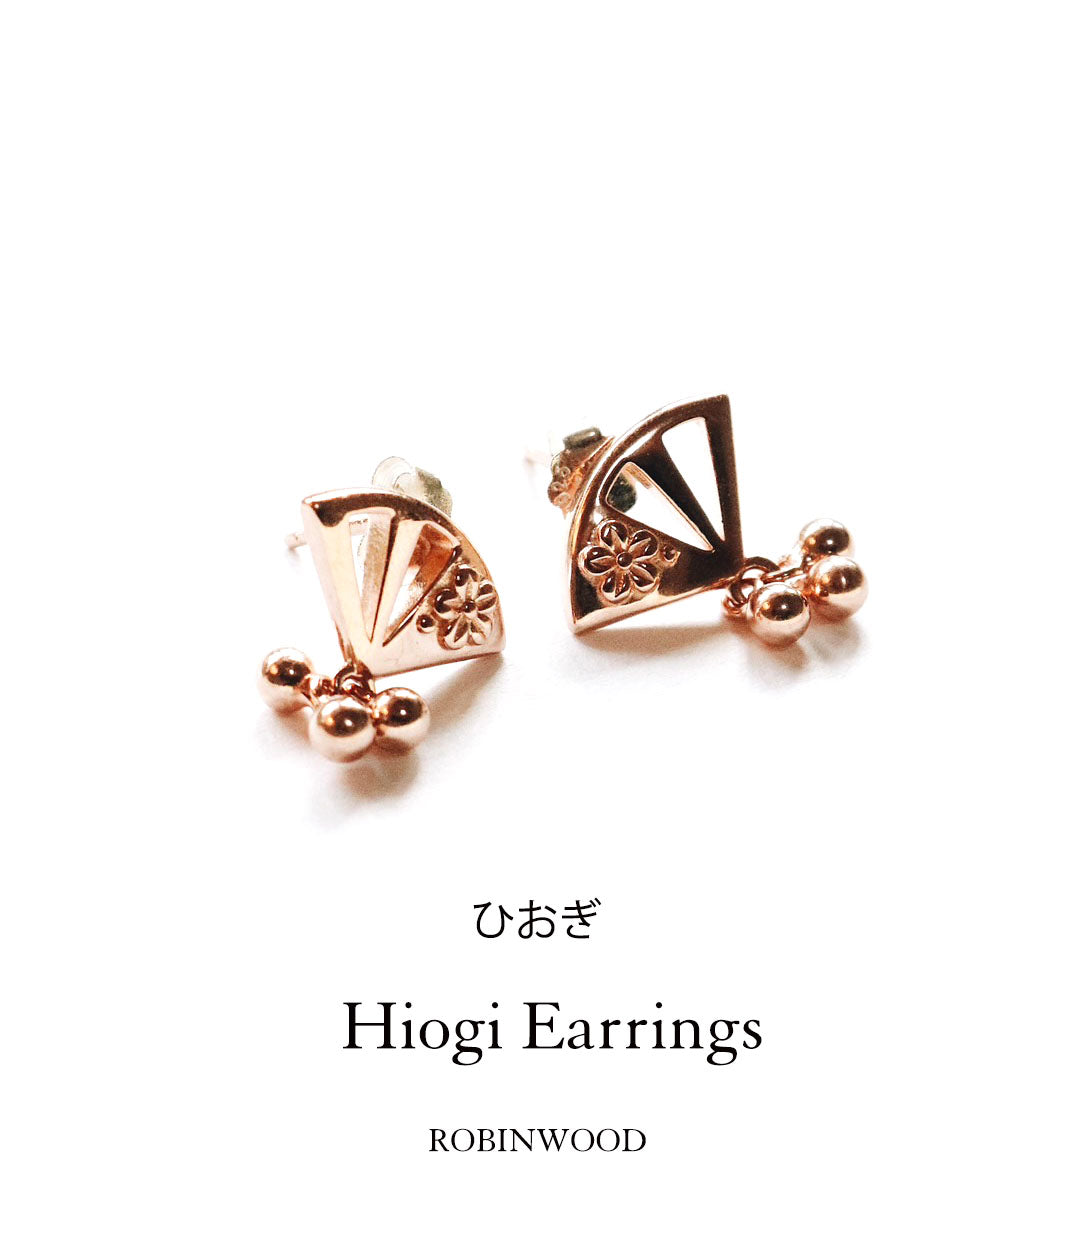 Limited Collection's " Hiogi Japan Earrings ", Robinwood Masterpieces